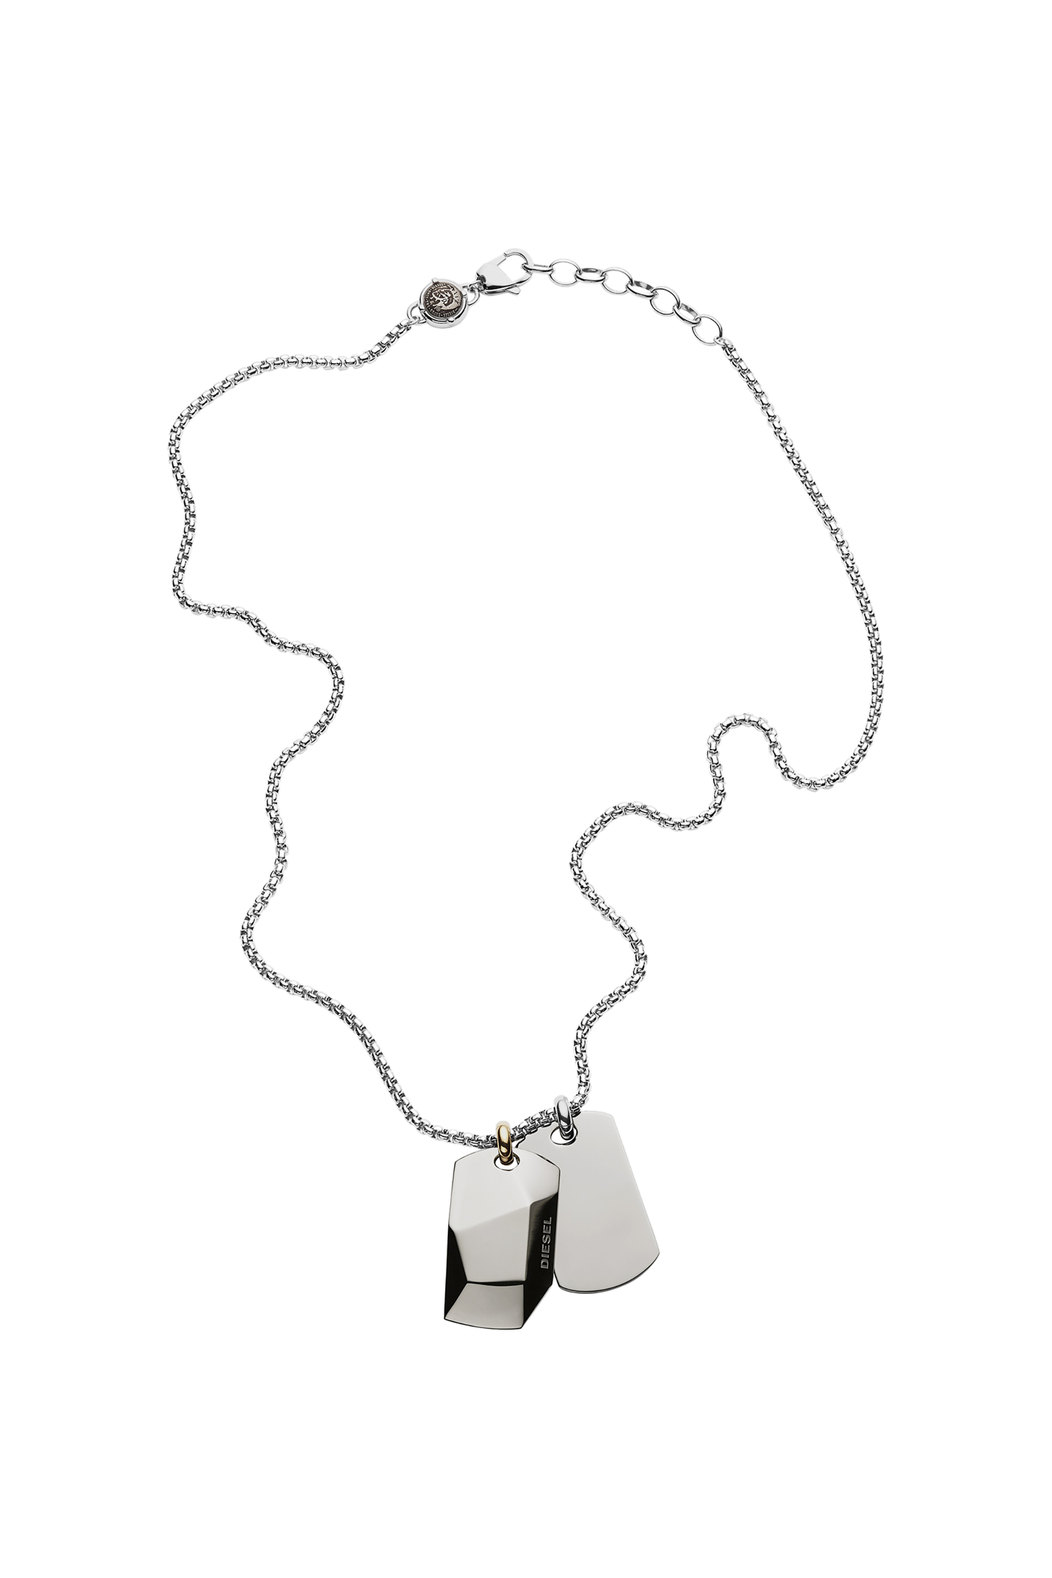 Stainless steel double dog tag necklace